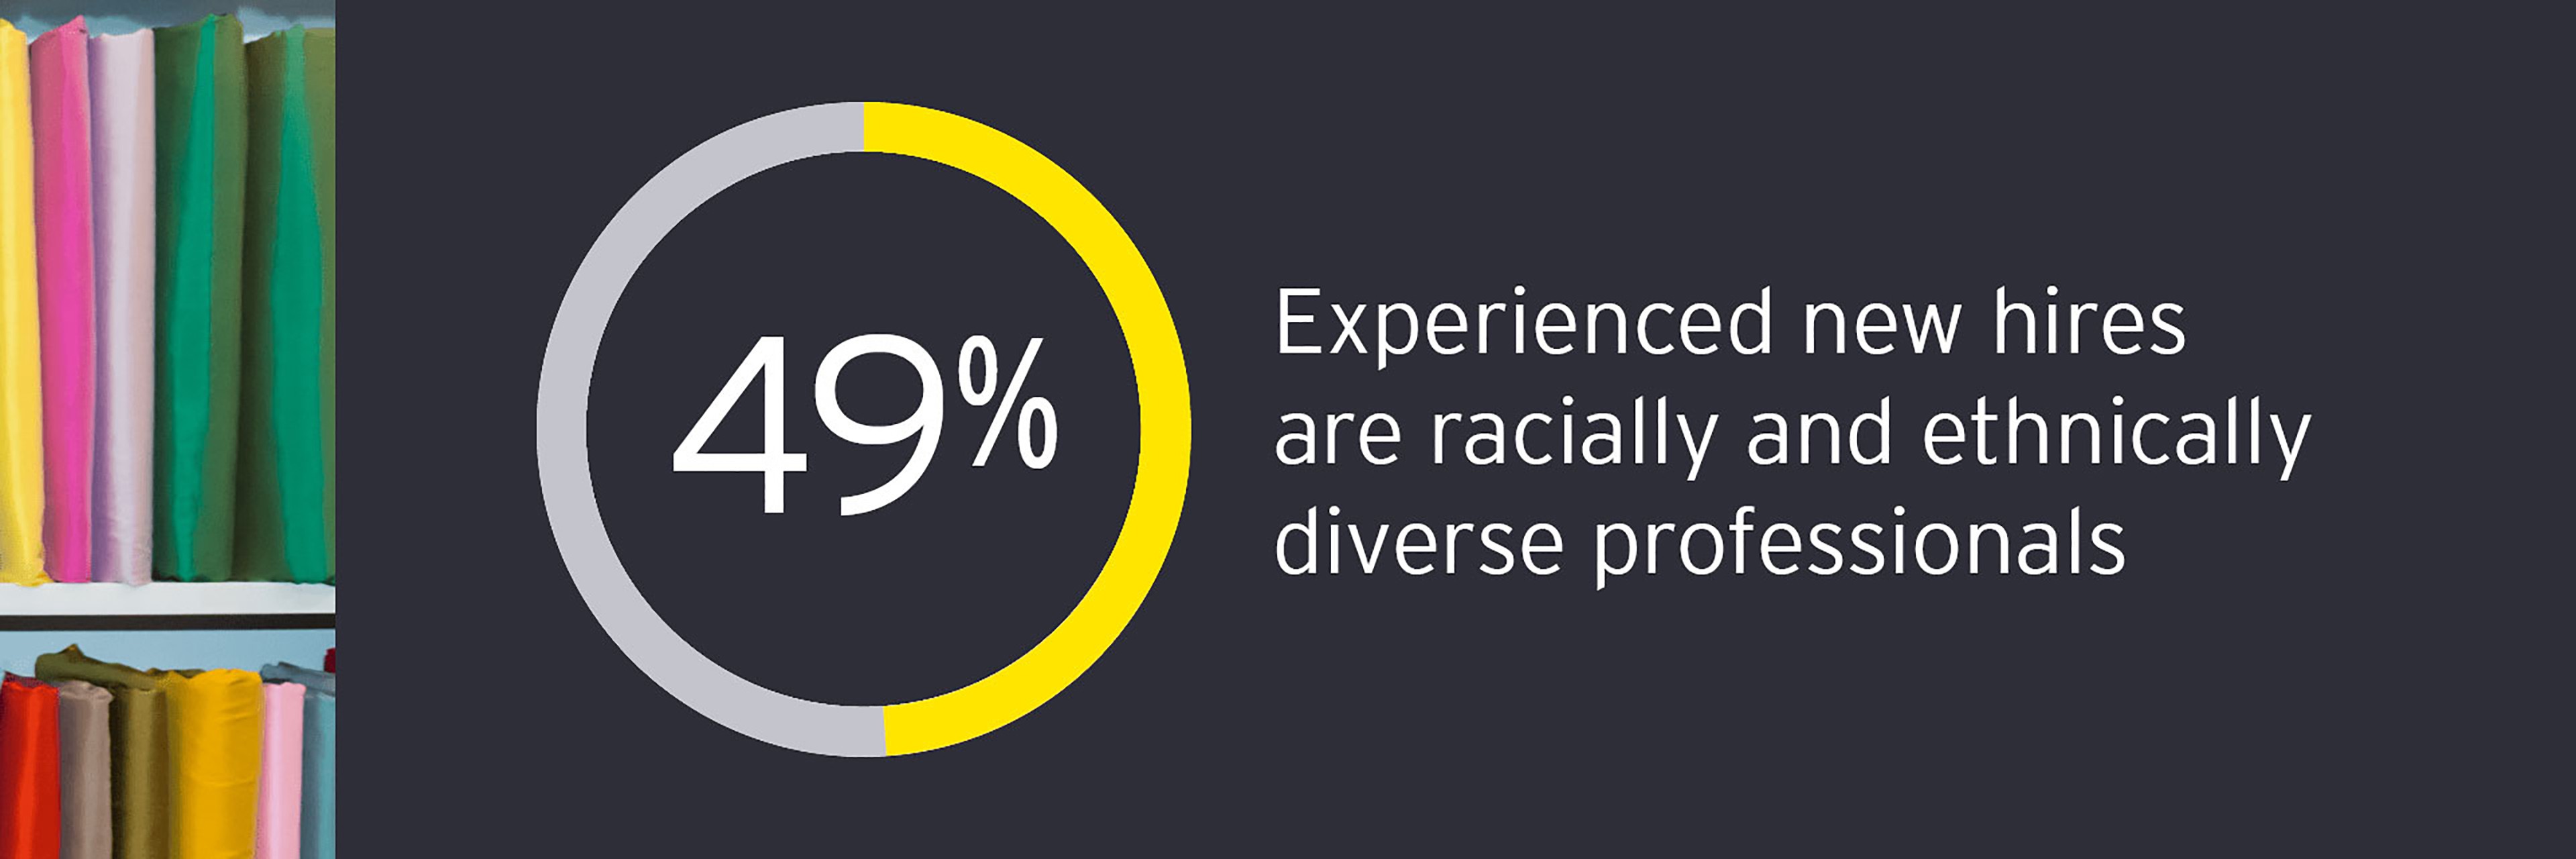 EY - 49% experienced new hires are racially and ethnically diverse professionals.